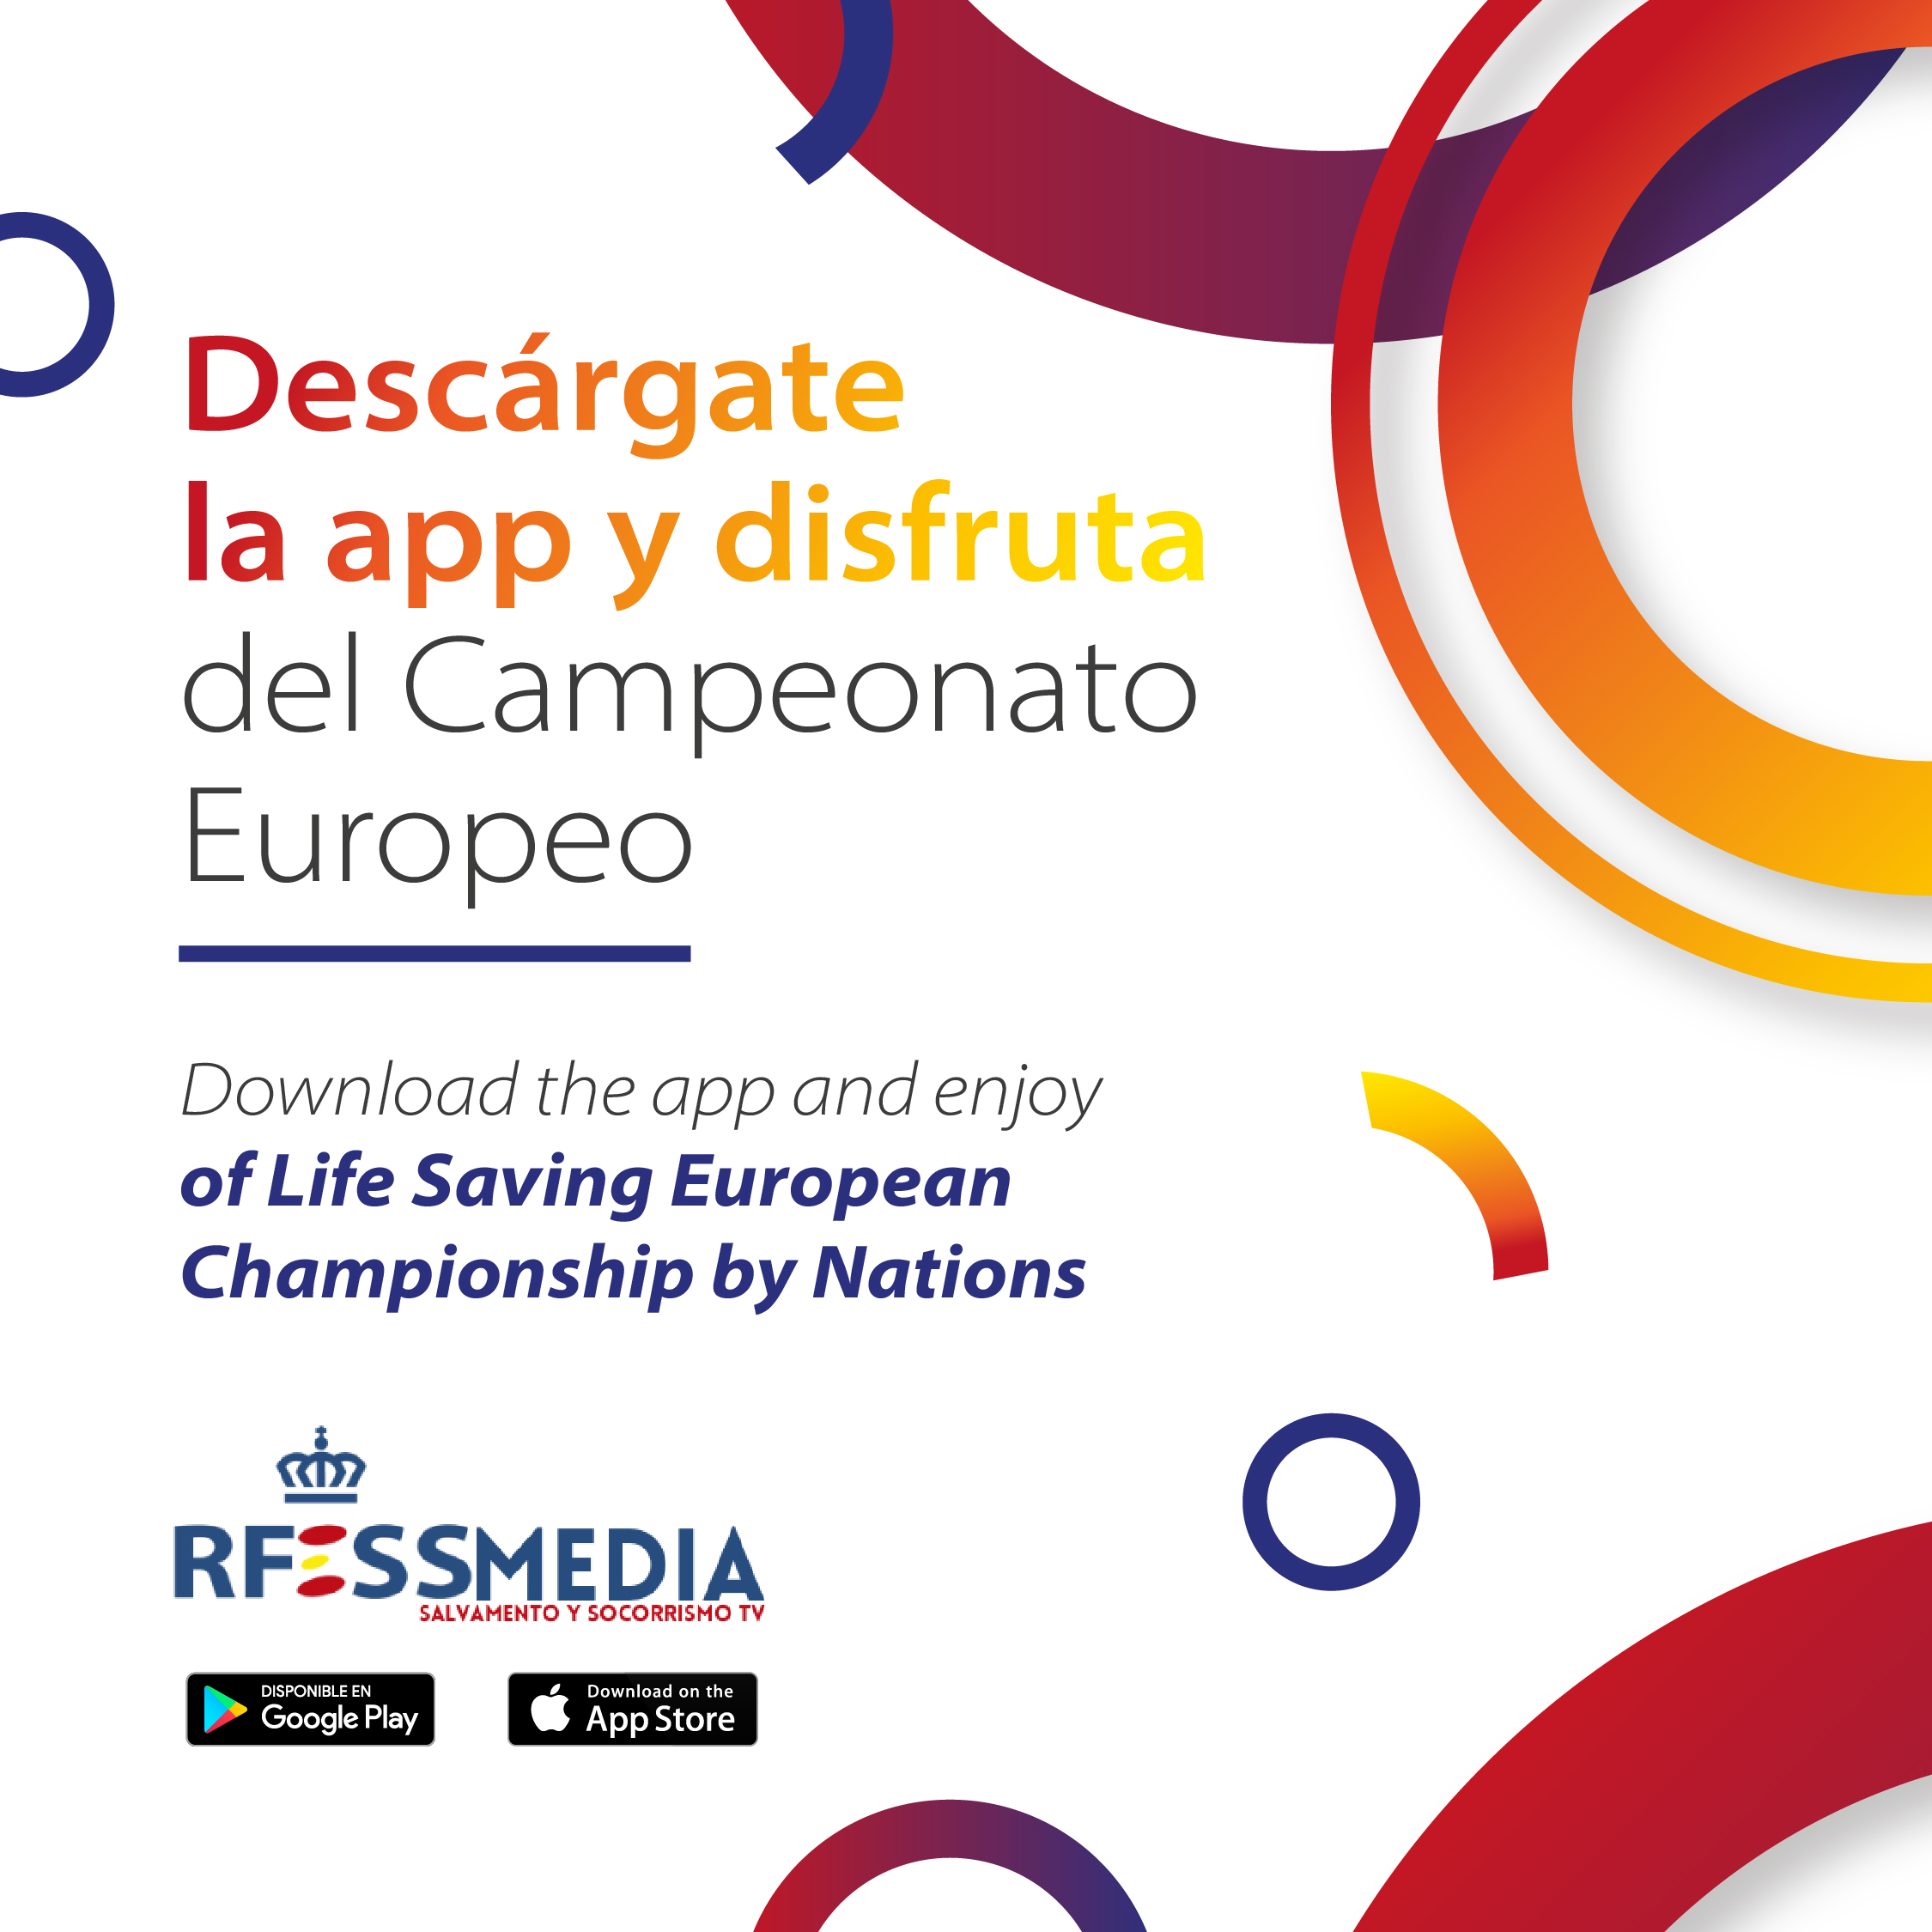 The European Lifesaving Championship will be available live worldwide on any device